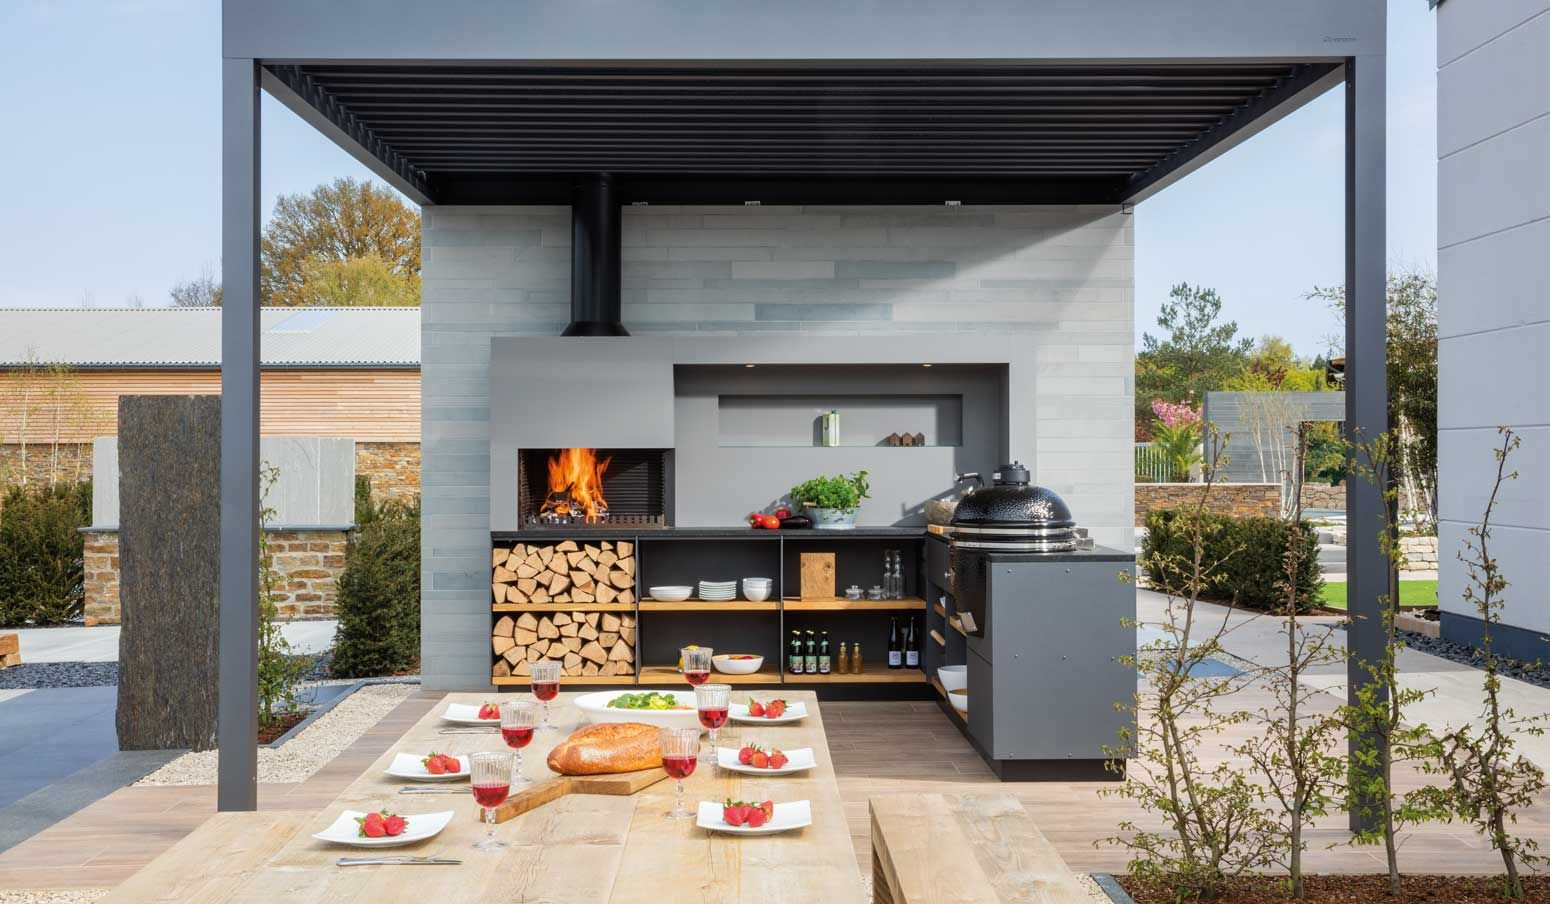 10 Clever Backyard Covered Outdoor Kitchen Ideas for Outdoor Living ...